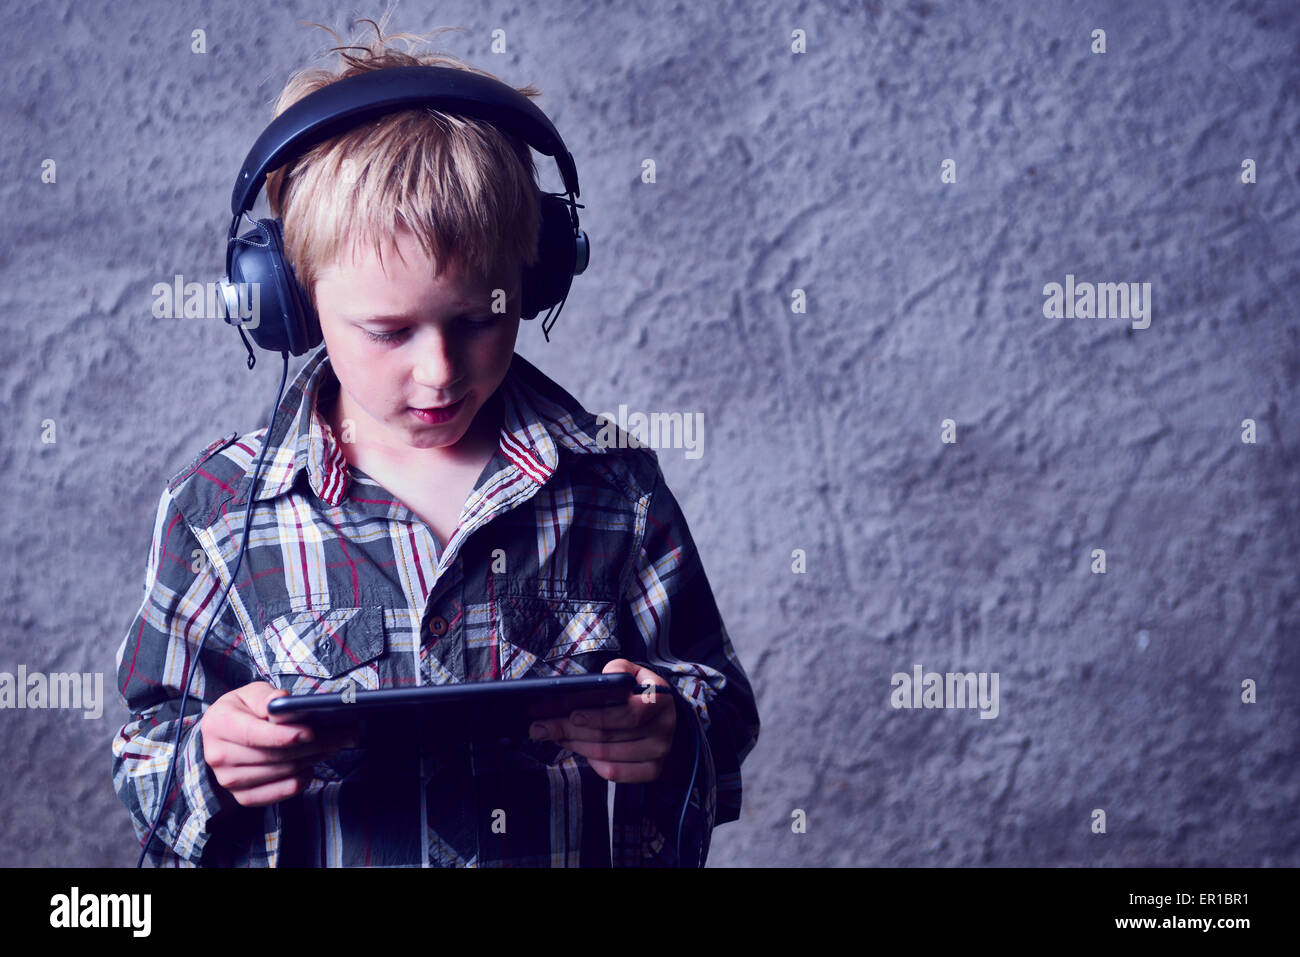 Child blond Boy listening to music with headphones and using digital tablet Stock Photo